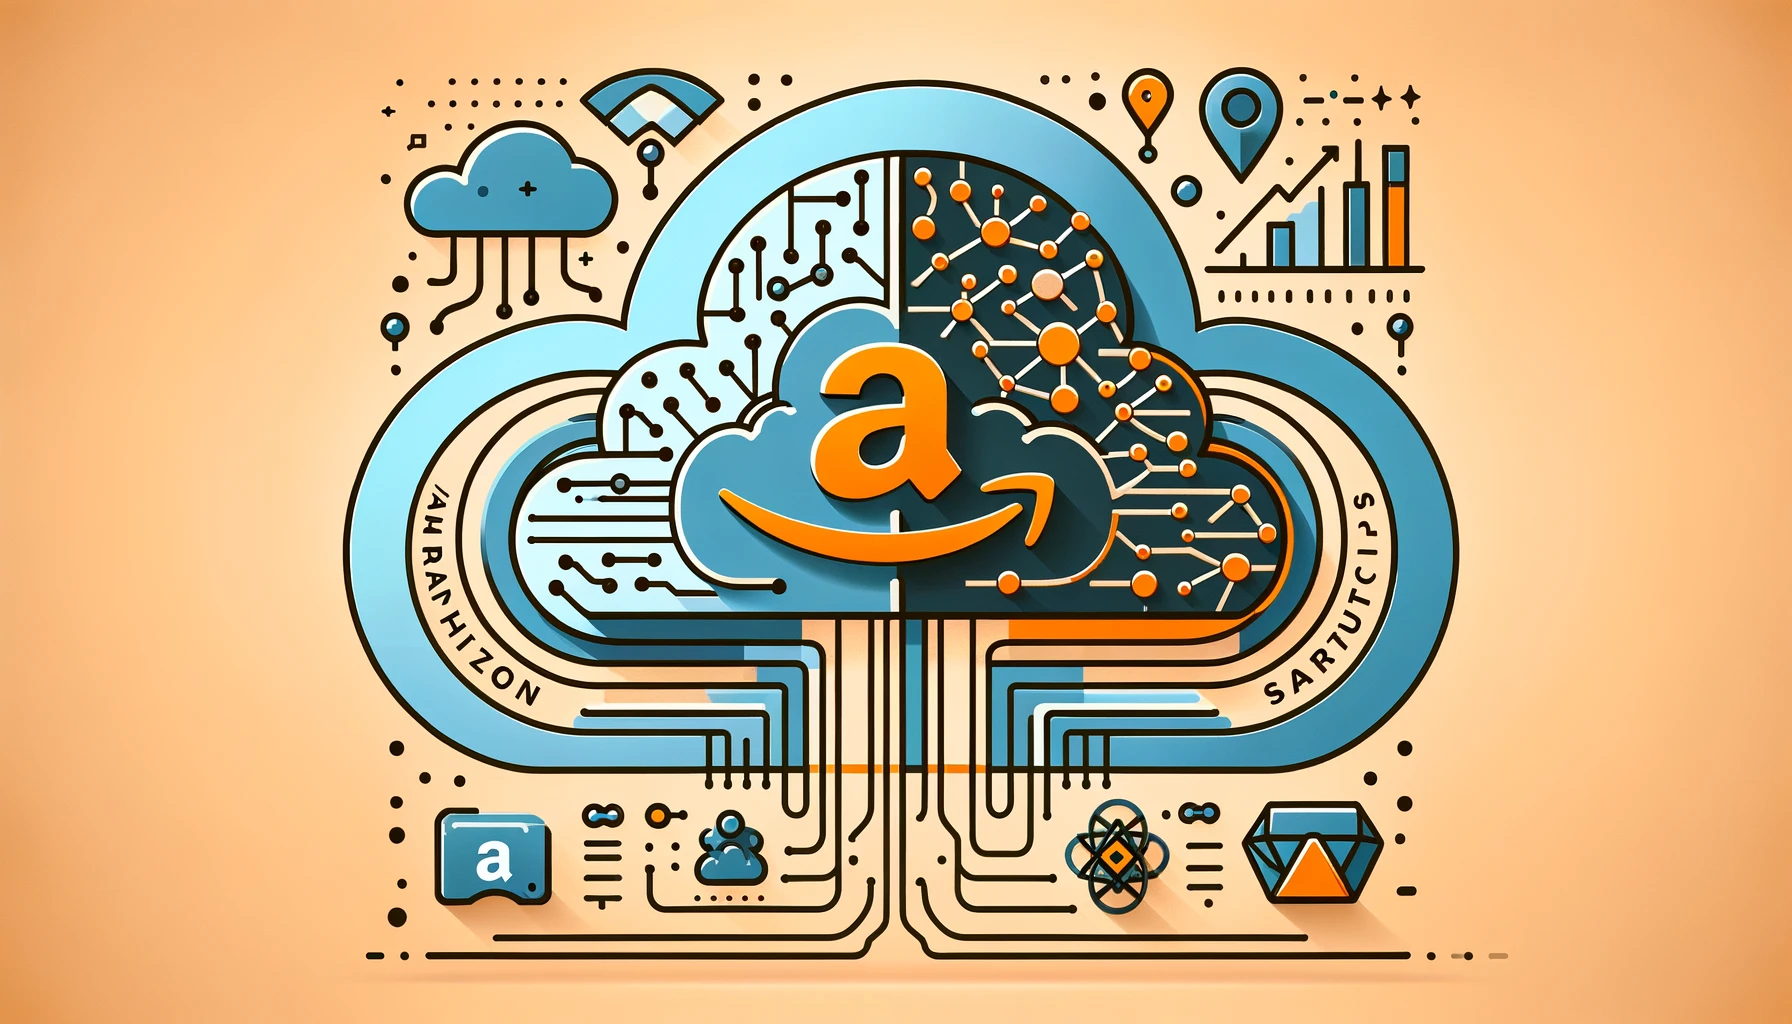 Amazon gives startups free credits for Anthropic AI models.